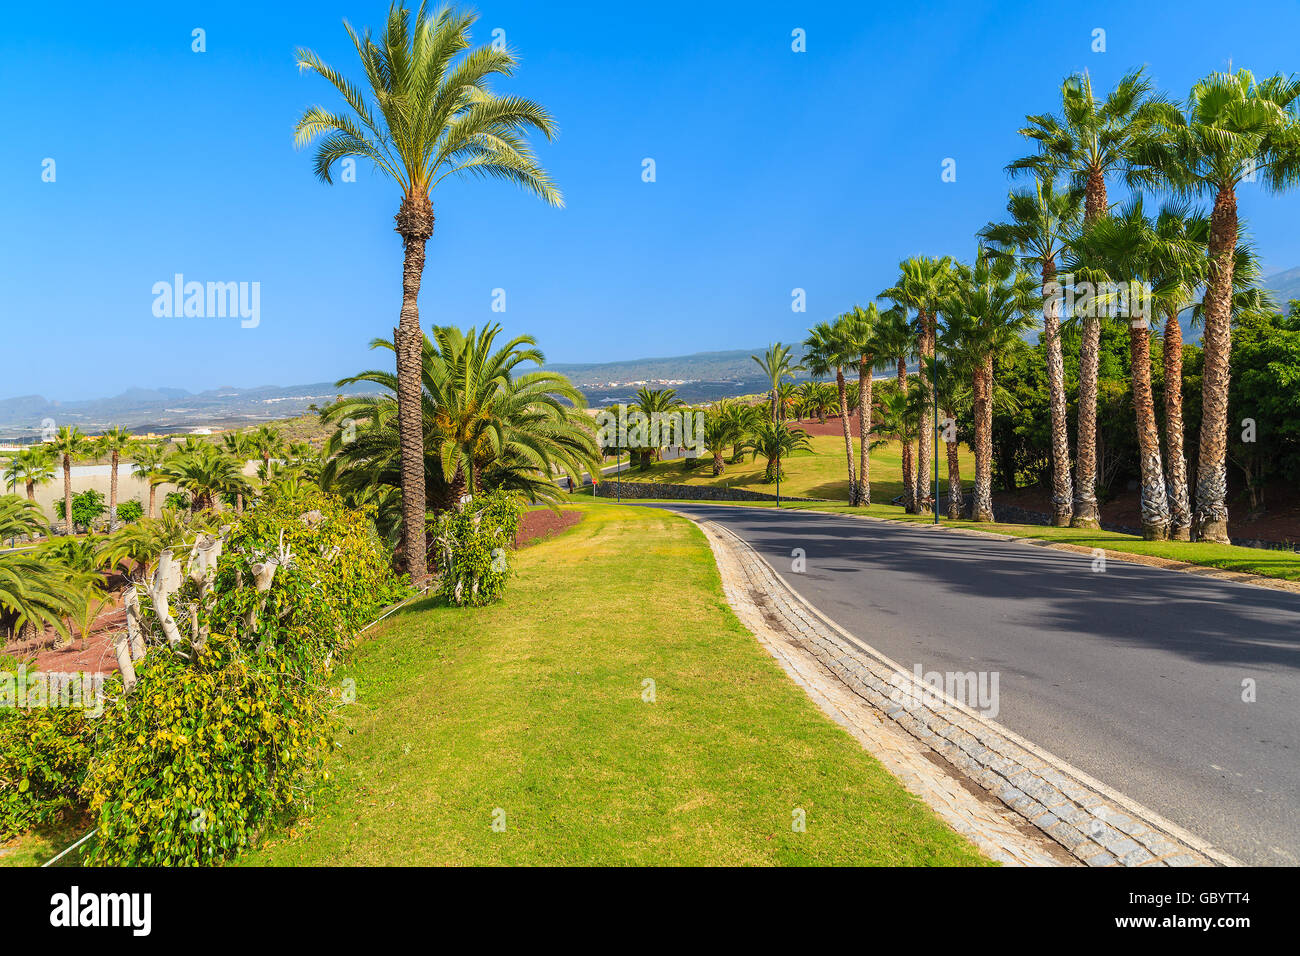 Road with palm trees in tropical landscape of Tenerife island, Spain Stock Photo